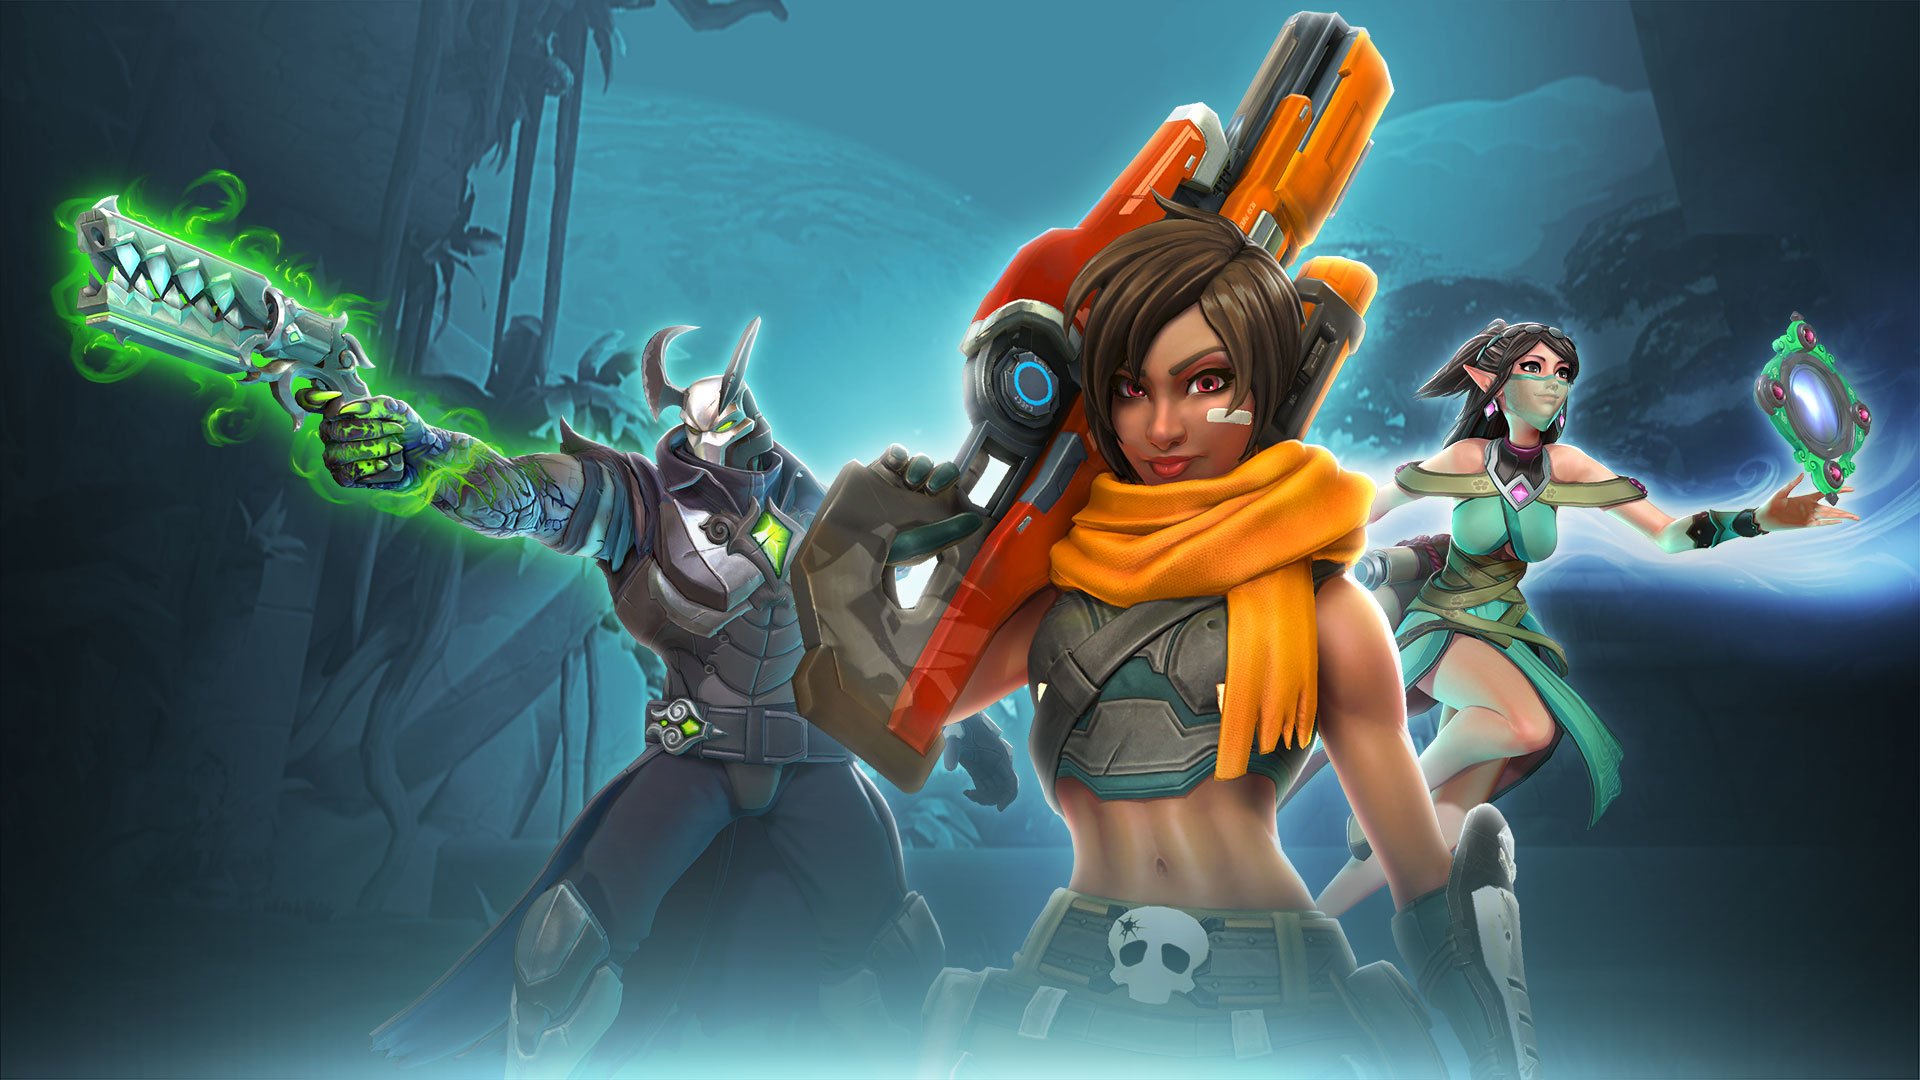 Paladins announces free-to-play battle royale mode called Battlegrounds